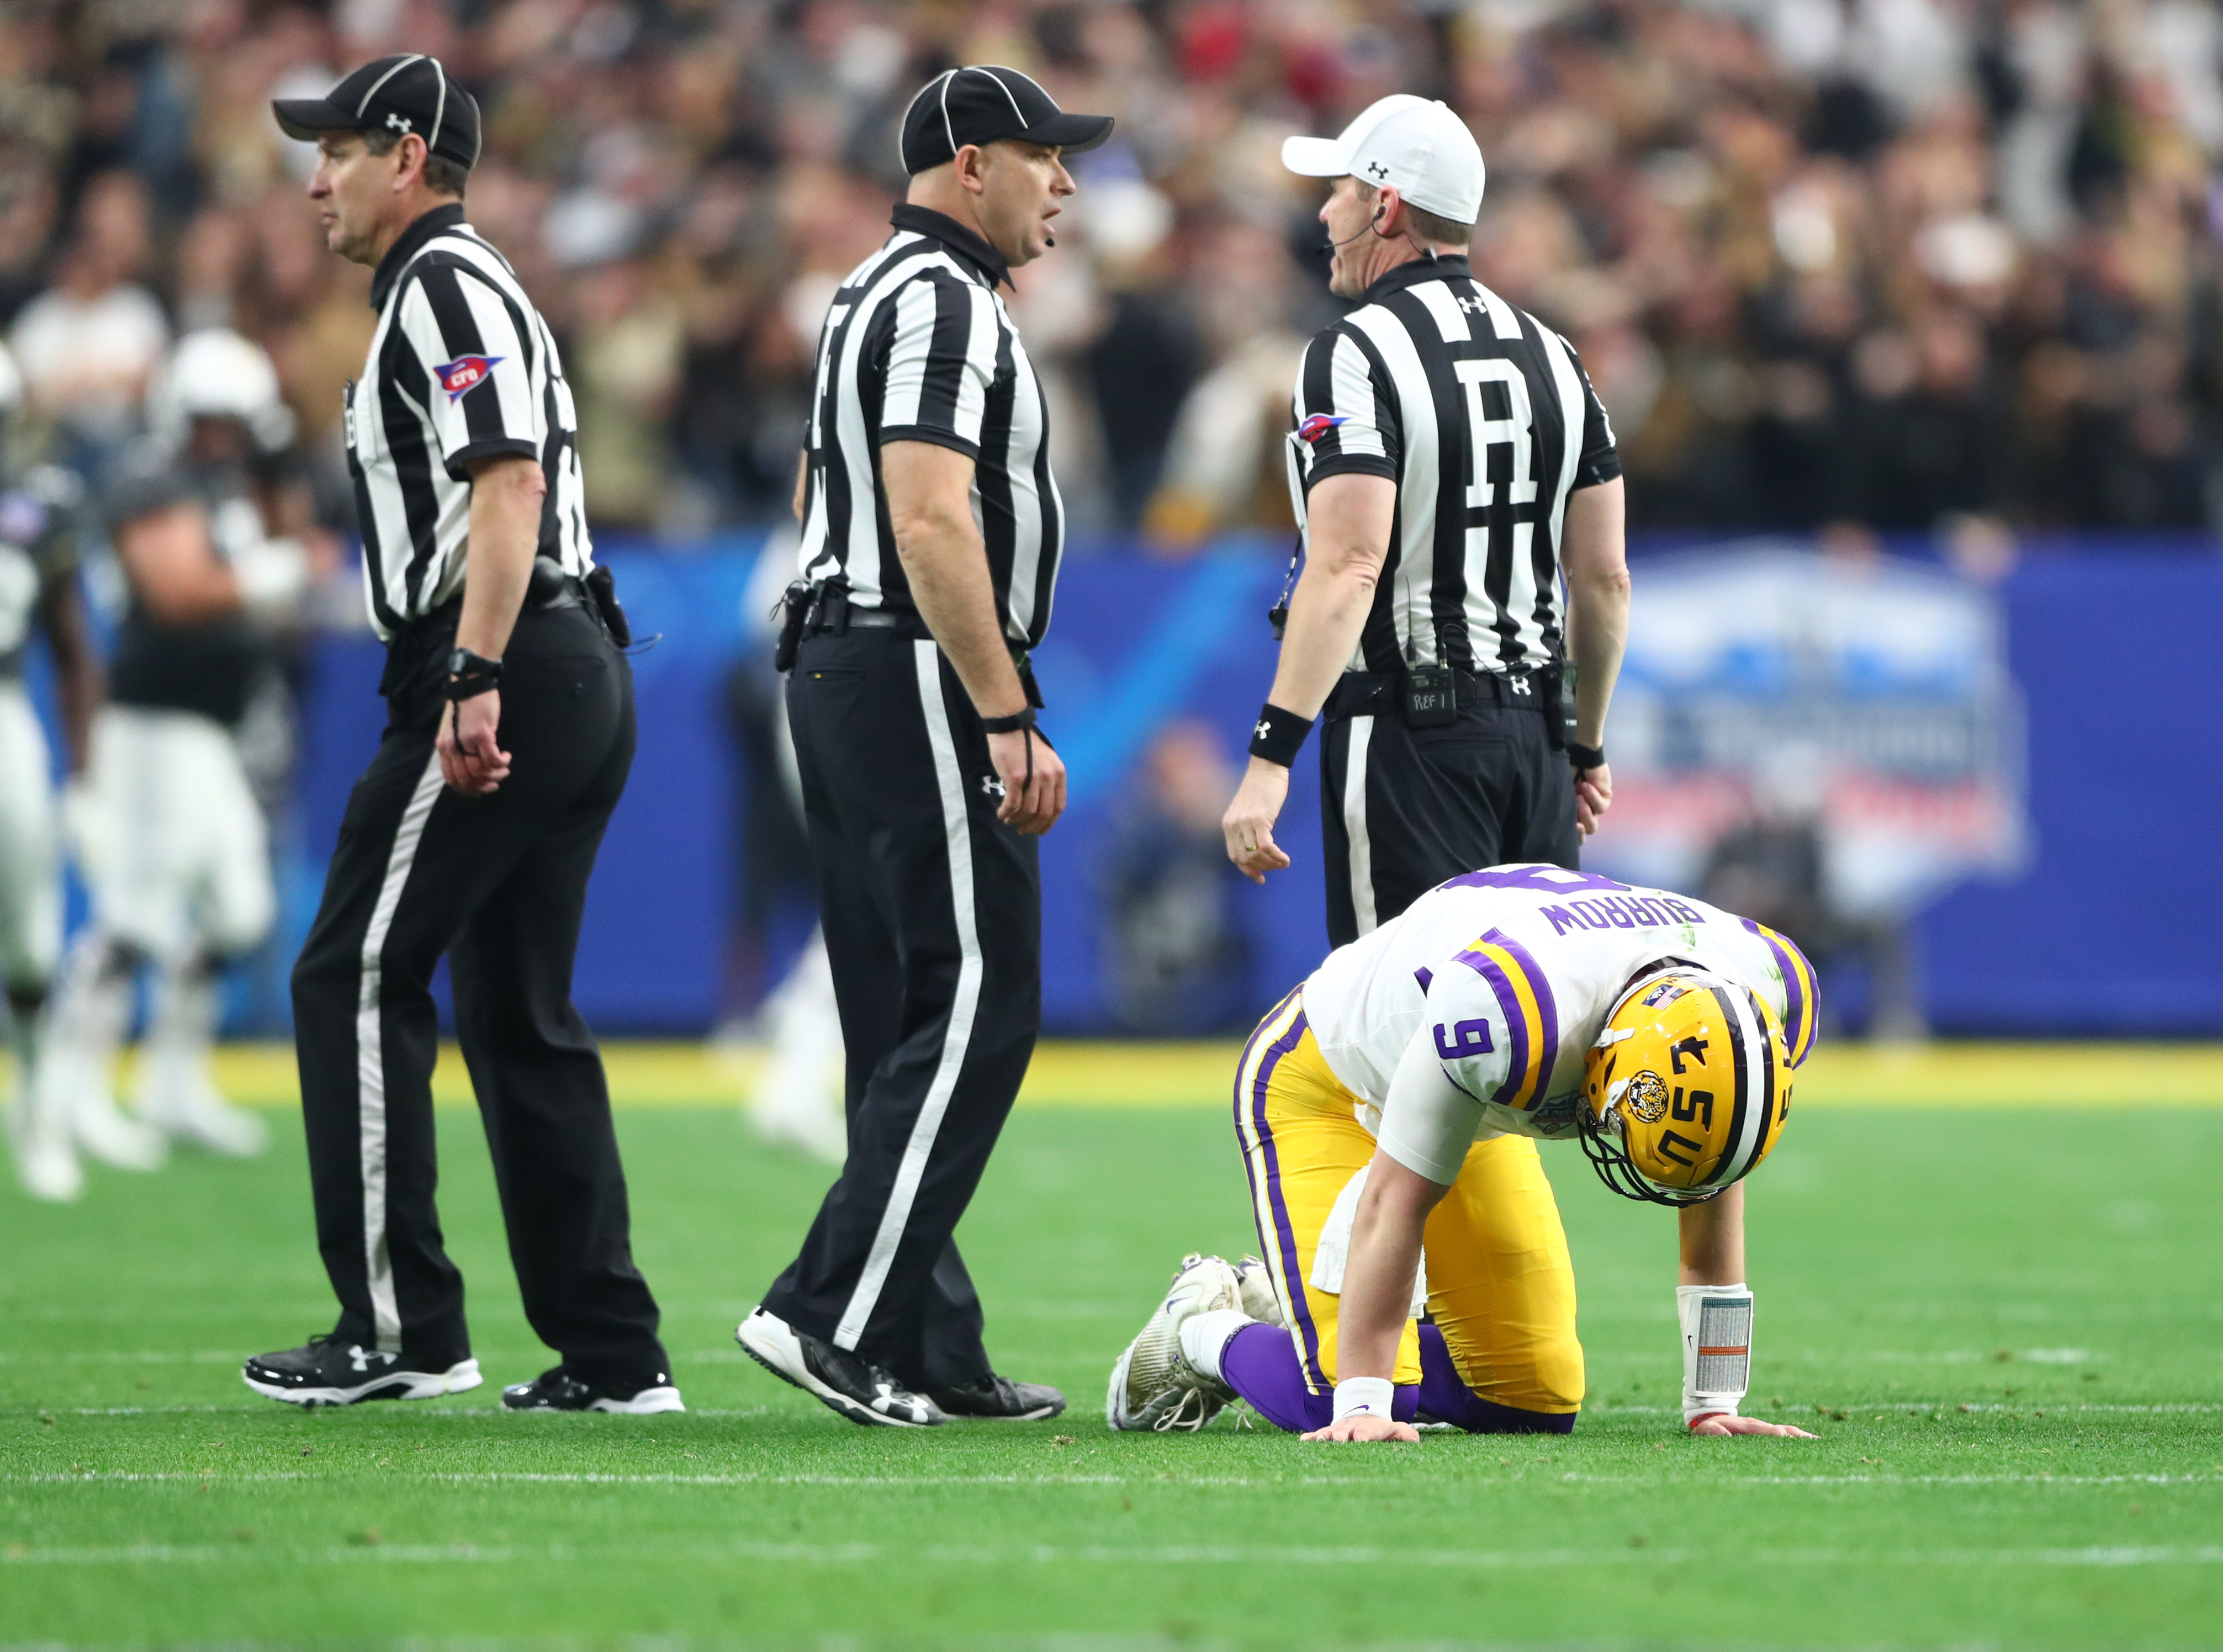 LSU's Burrow bounces back from huge hit, leads Tigers to Fiesta Bowl win